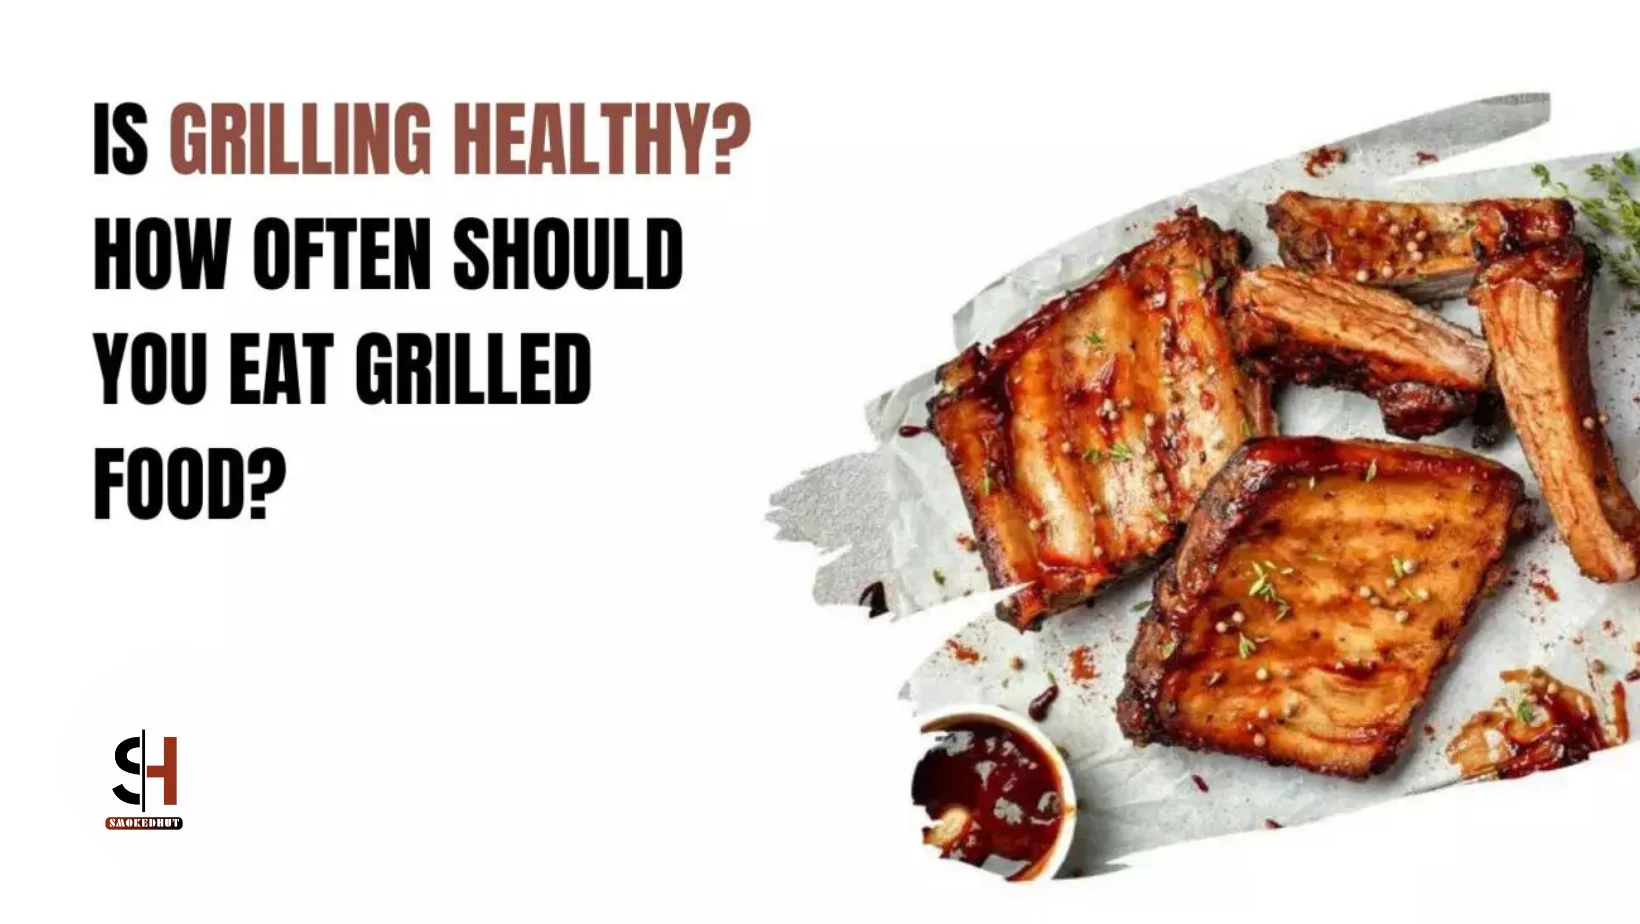 IS GRILLING HEALTHY HOW OFTEN SHOULD YOU EAT GRILLED FOOD